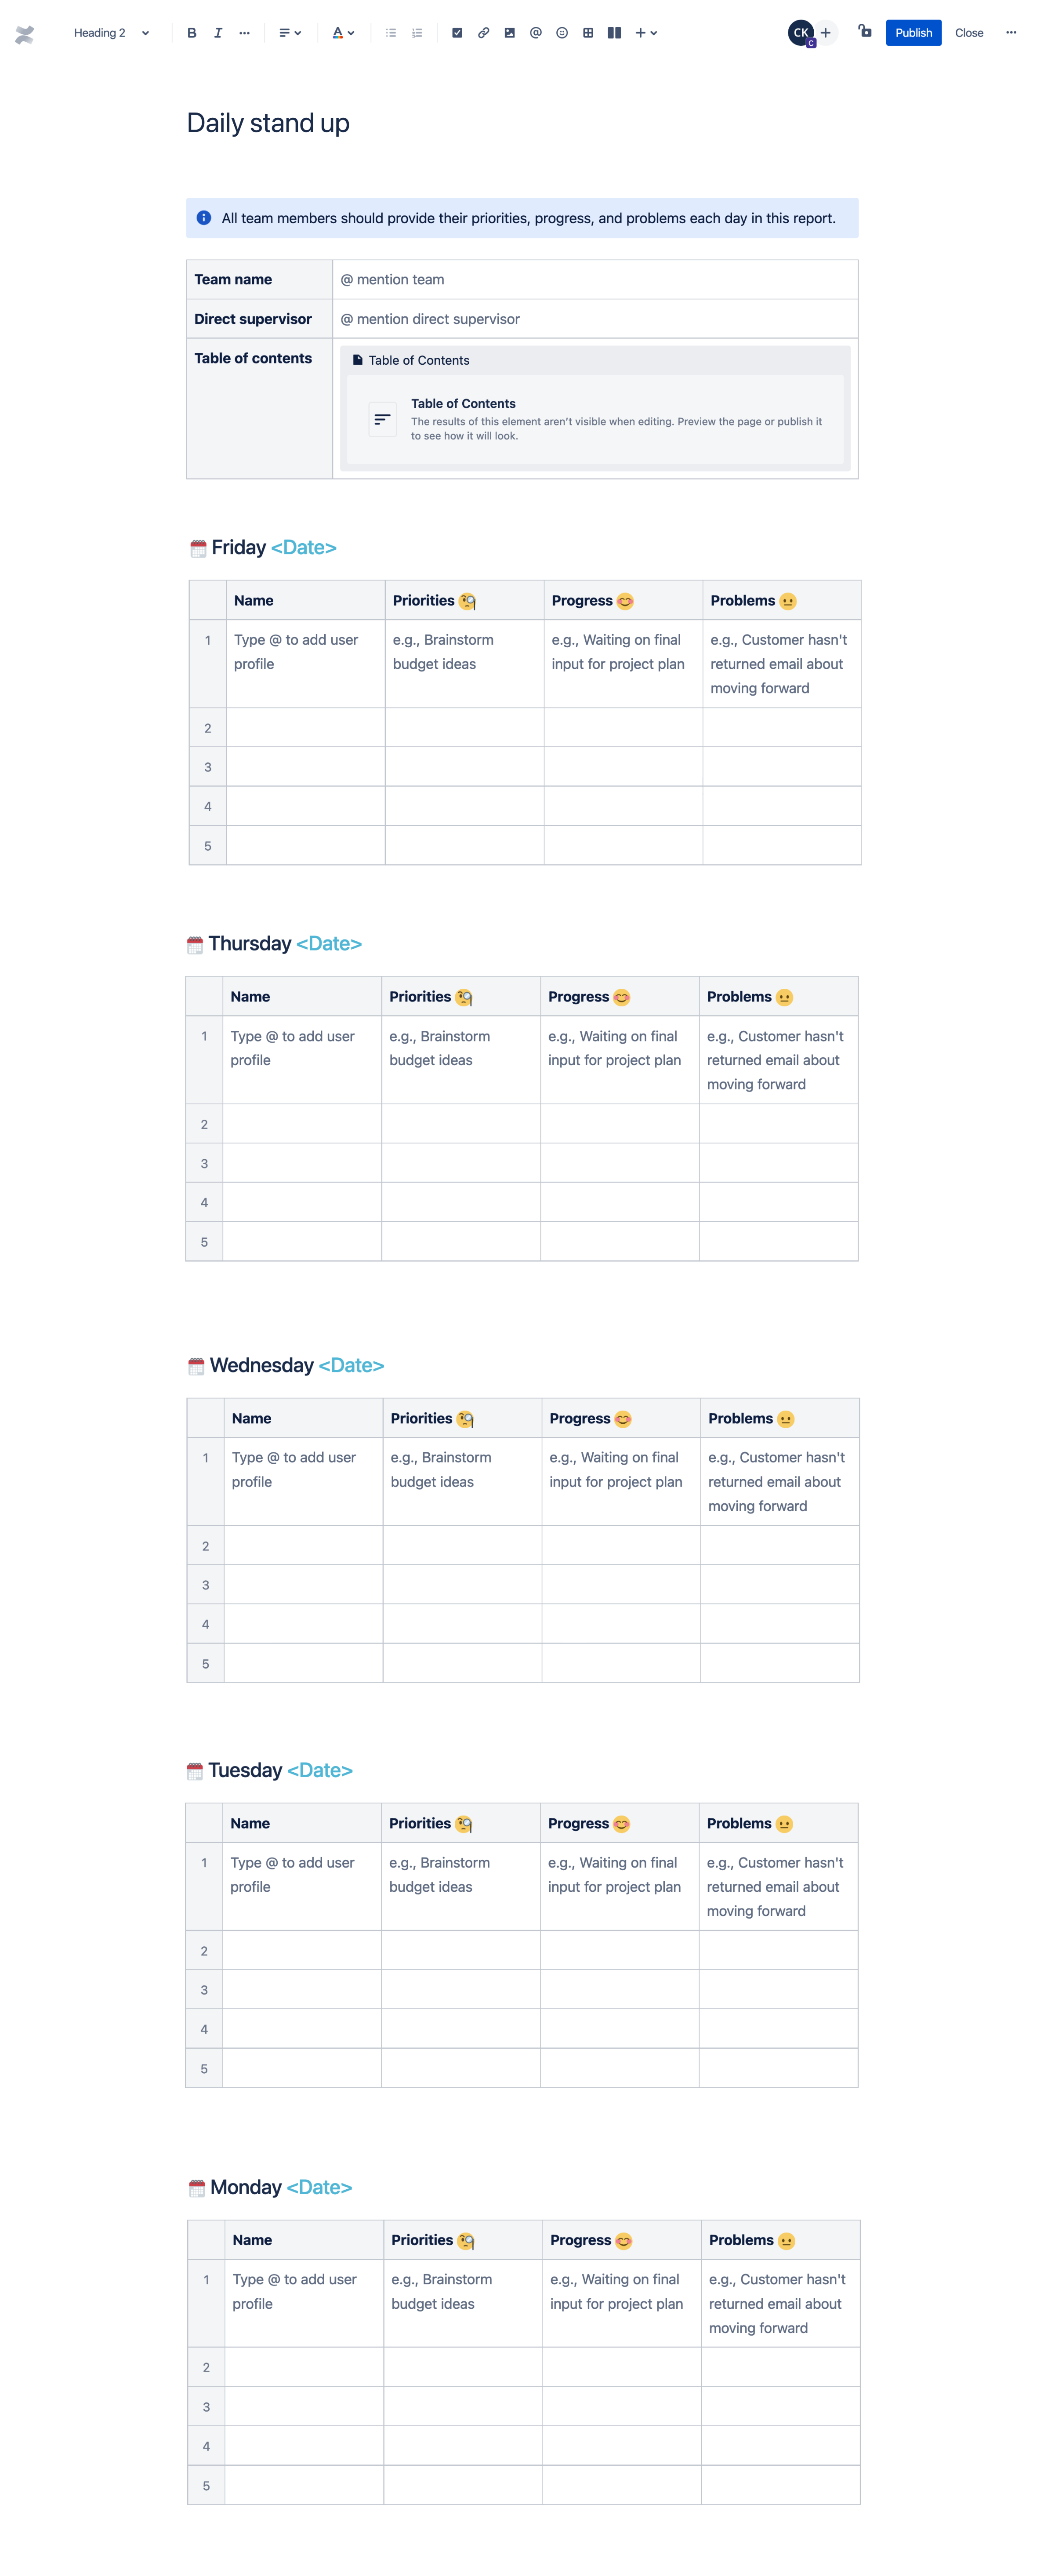 Daily stand up template - by Atlassian